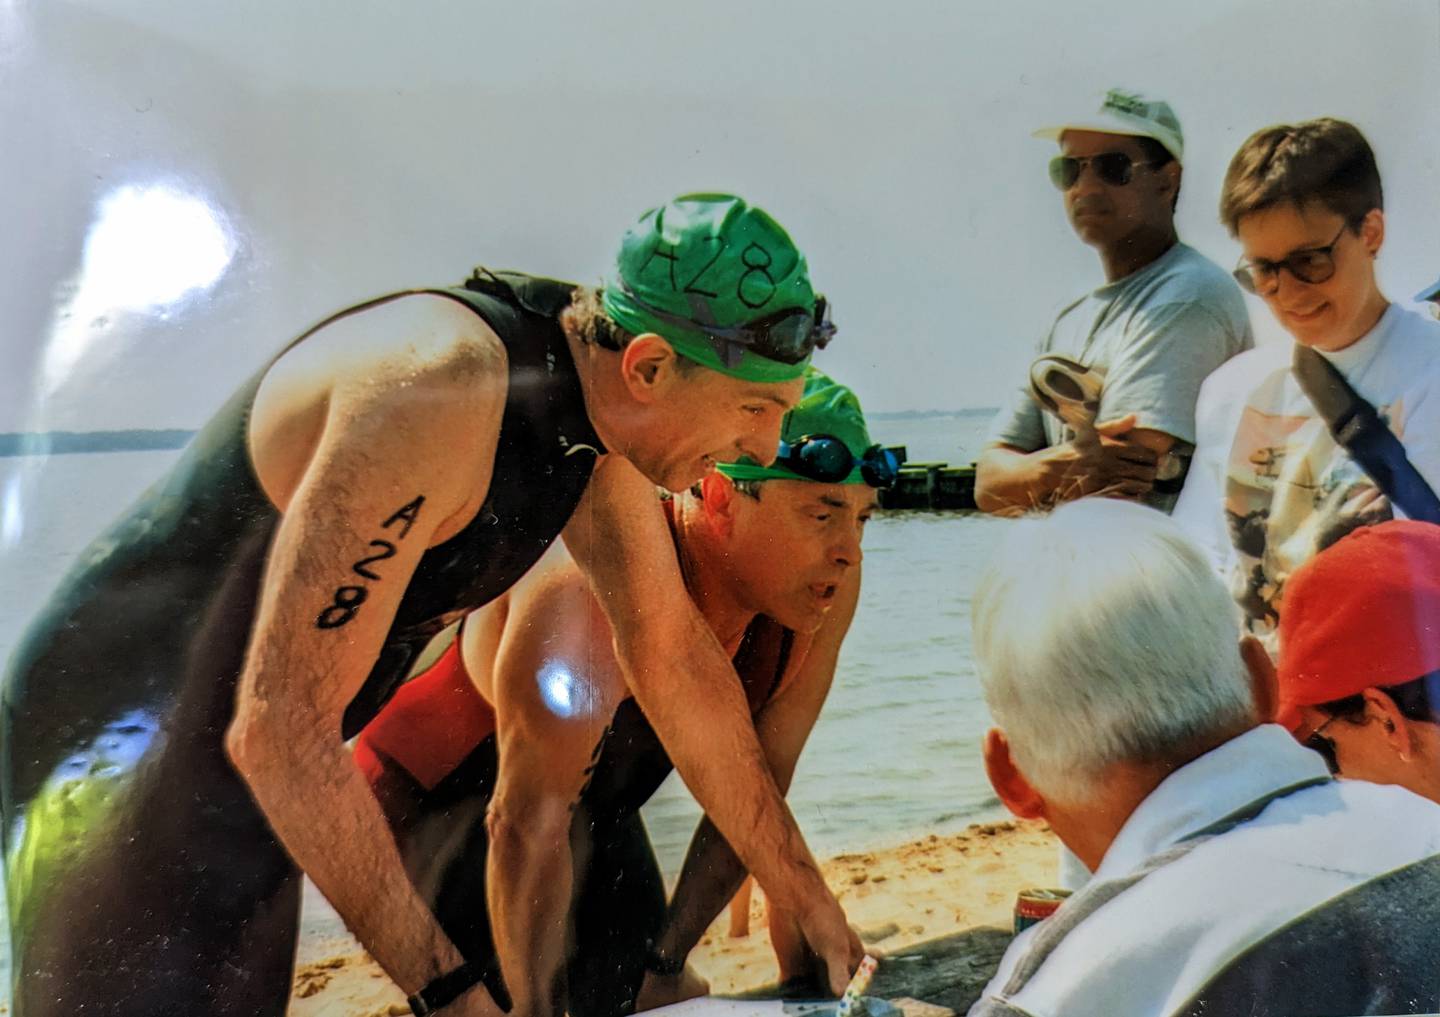 Martin Wasserman after completing the Great Chesapeake Bay Swim in 1995. At 81, he'll be the oldest swimmer in this year's swim on Sunday and after a year-long vegan diet he'll be wearing the same wetsuit.